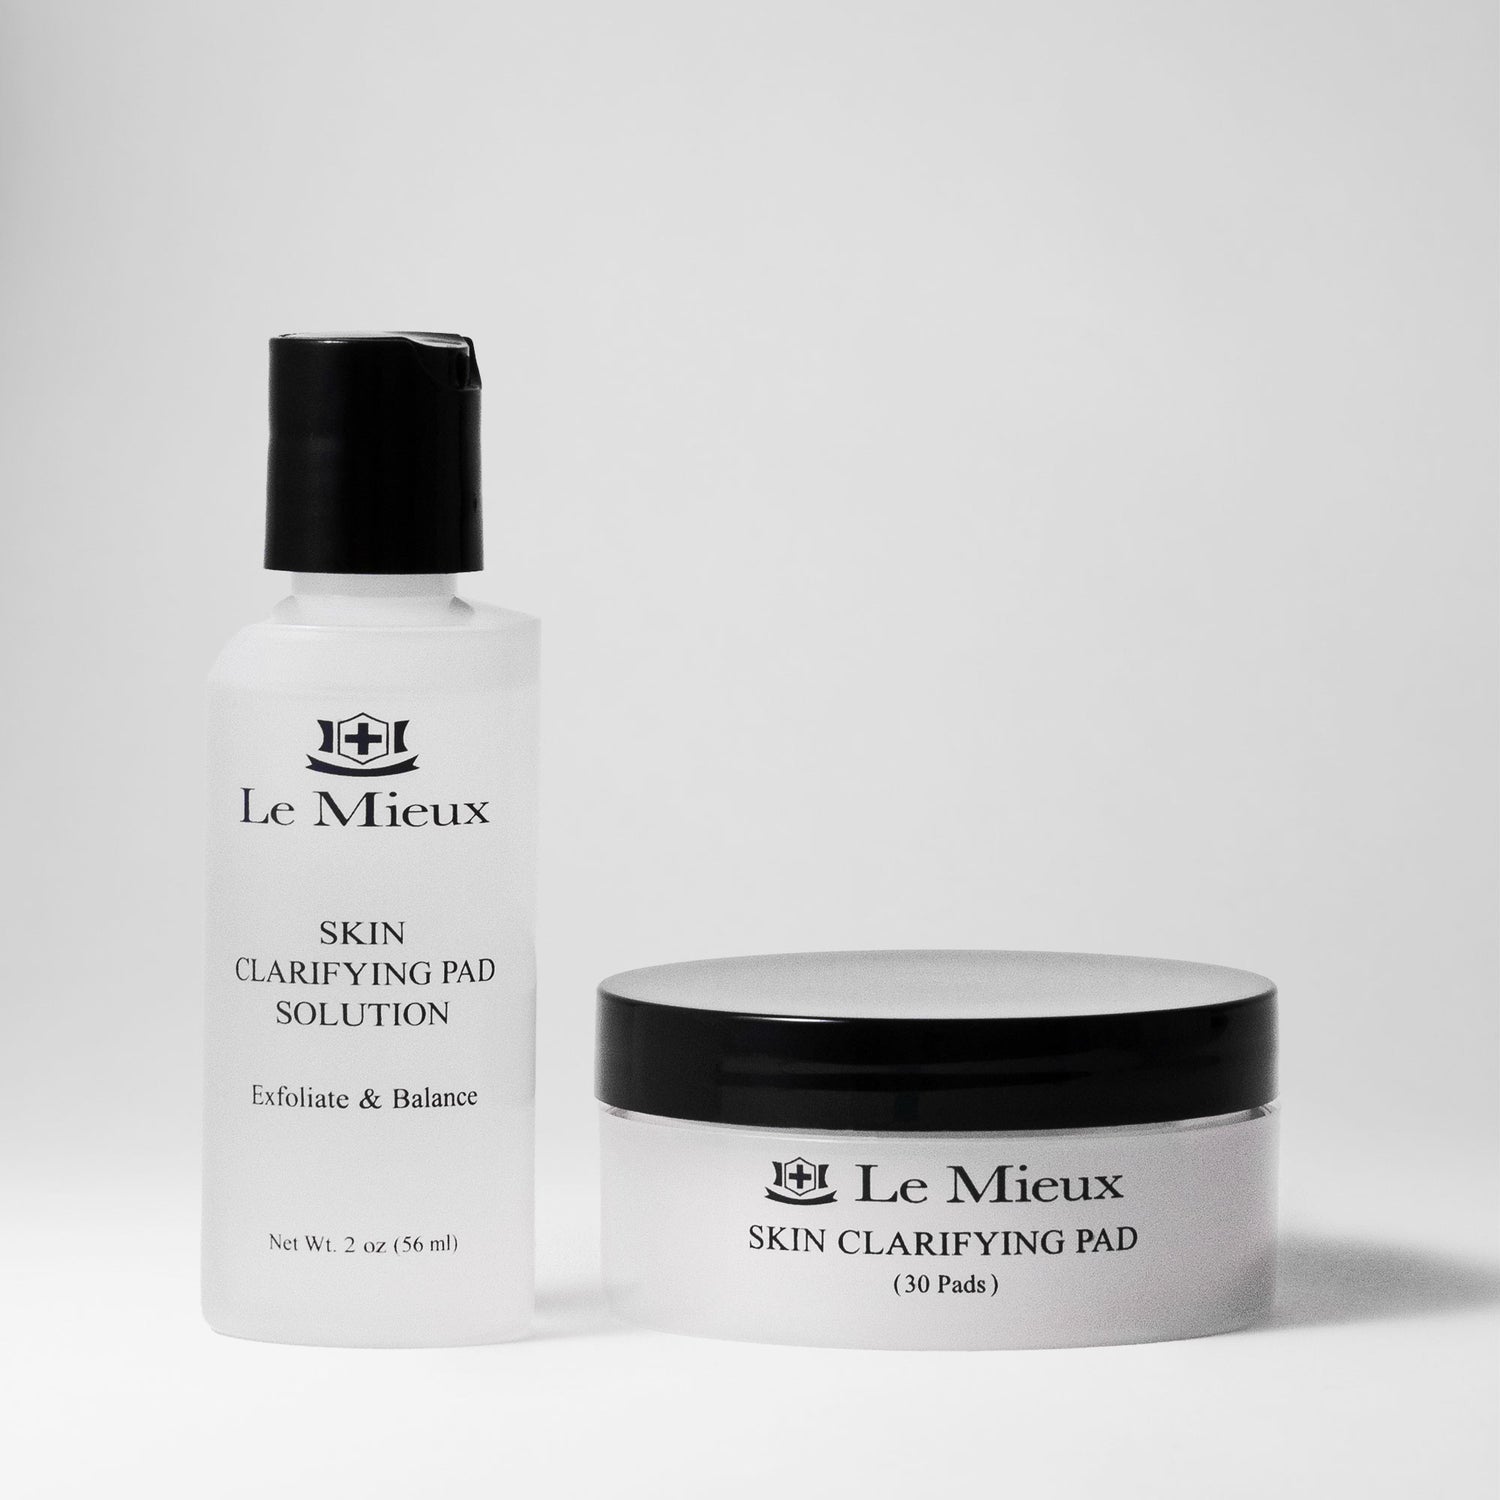  SKIN CLARIFYING PAD from Le Mieux Skincare - 1